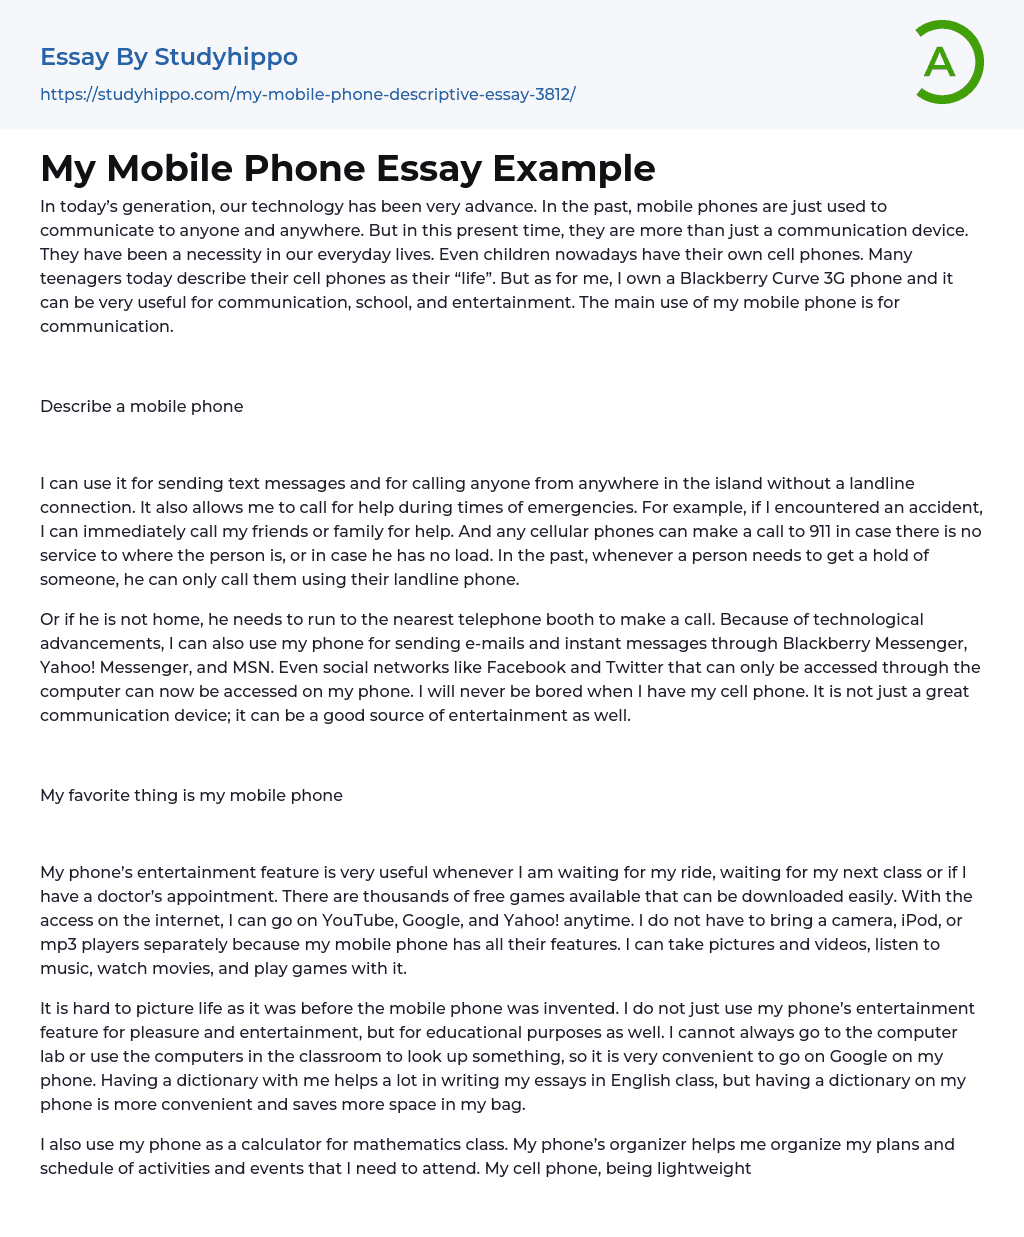 My Mobile Phone Essay Example